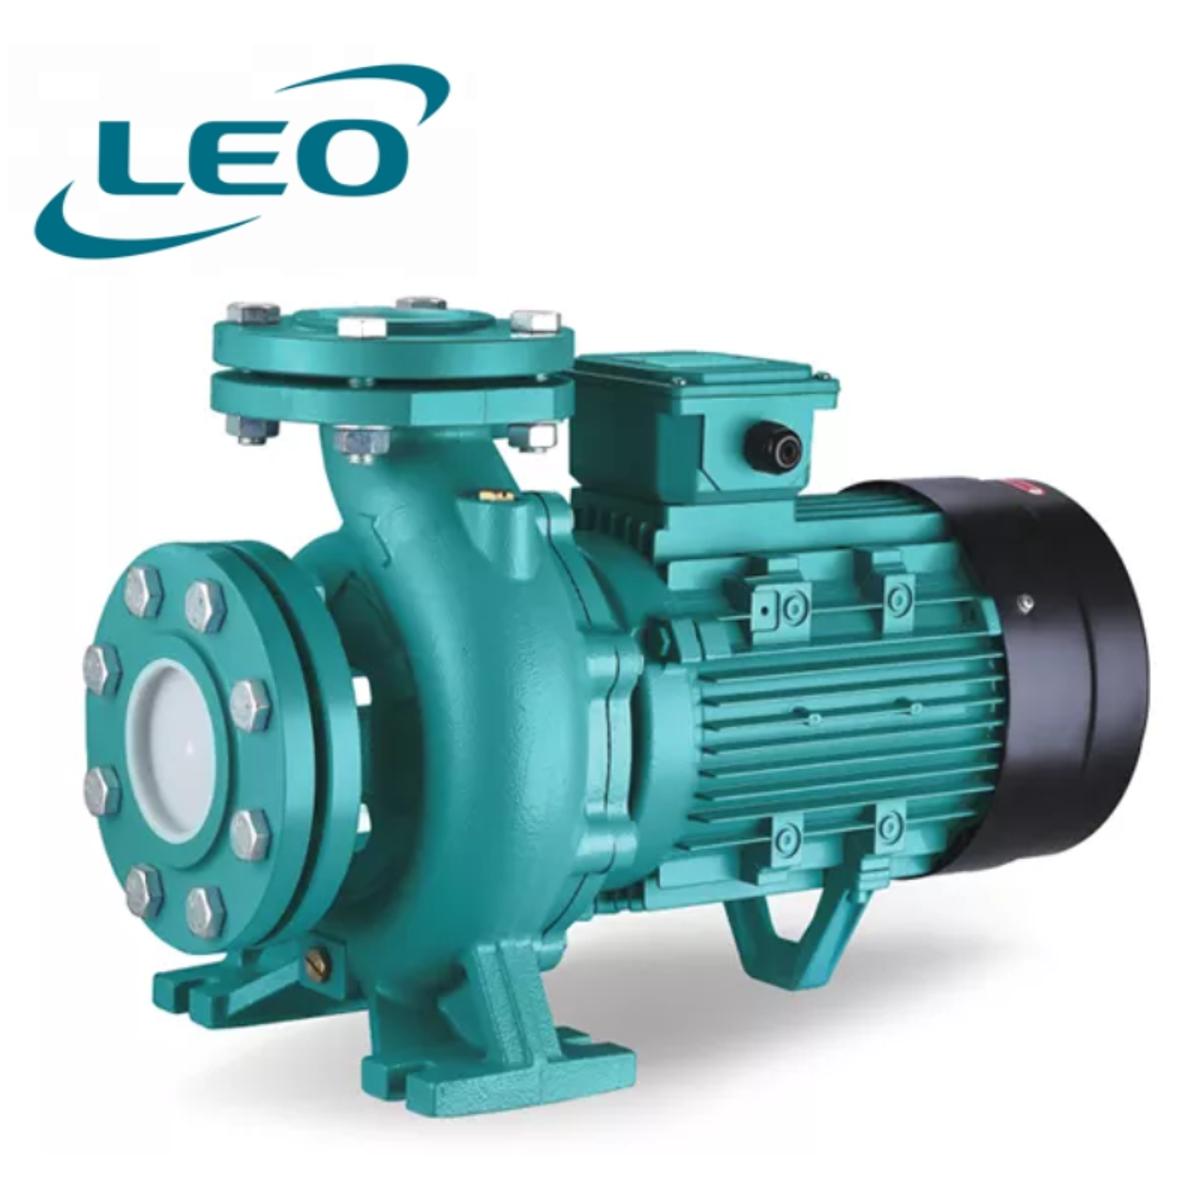 LEO - XST-50-125-30 - 3000 W - 4.0 HP - Clean Water HEAVY DUTY Centrifugal Pump With FLANGES  - 380V~400V THREE PHASE - SIZE :- 2 1-2" x 2" - European STANDARD